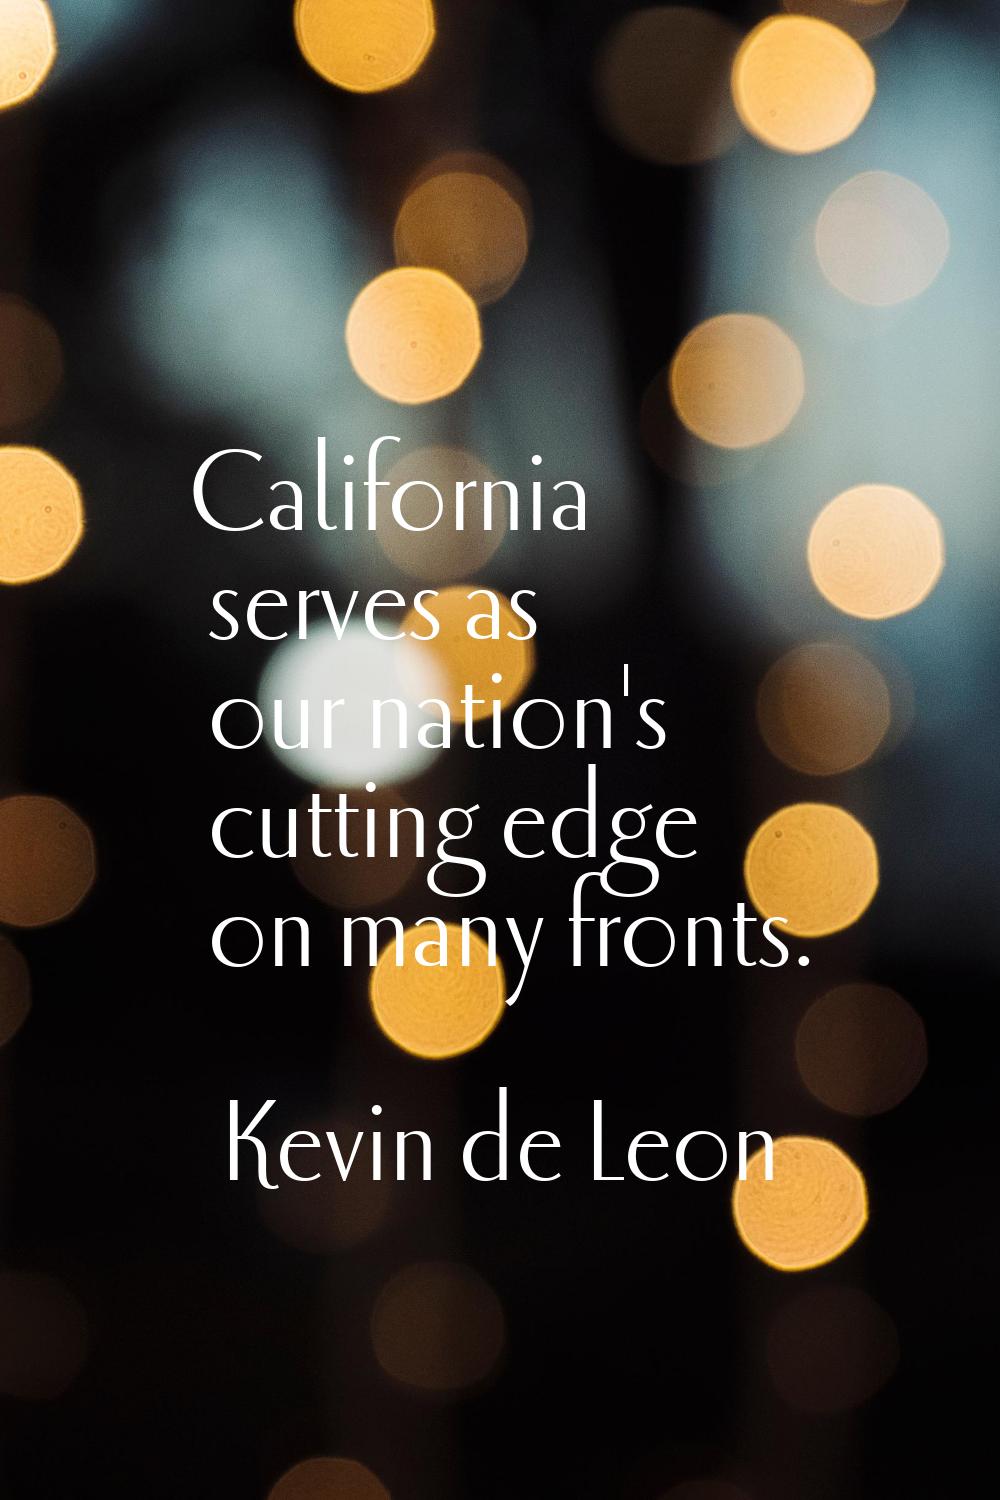 California serves as our nation's cutting edge on many fronts.